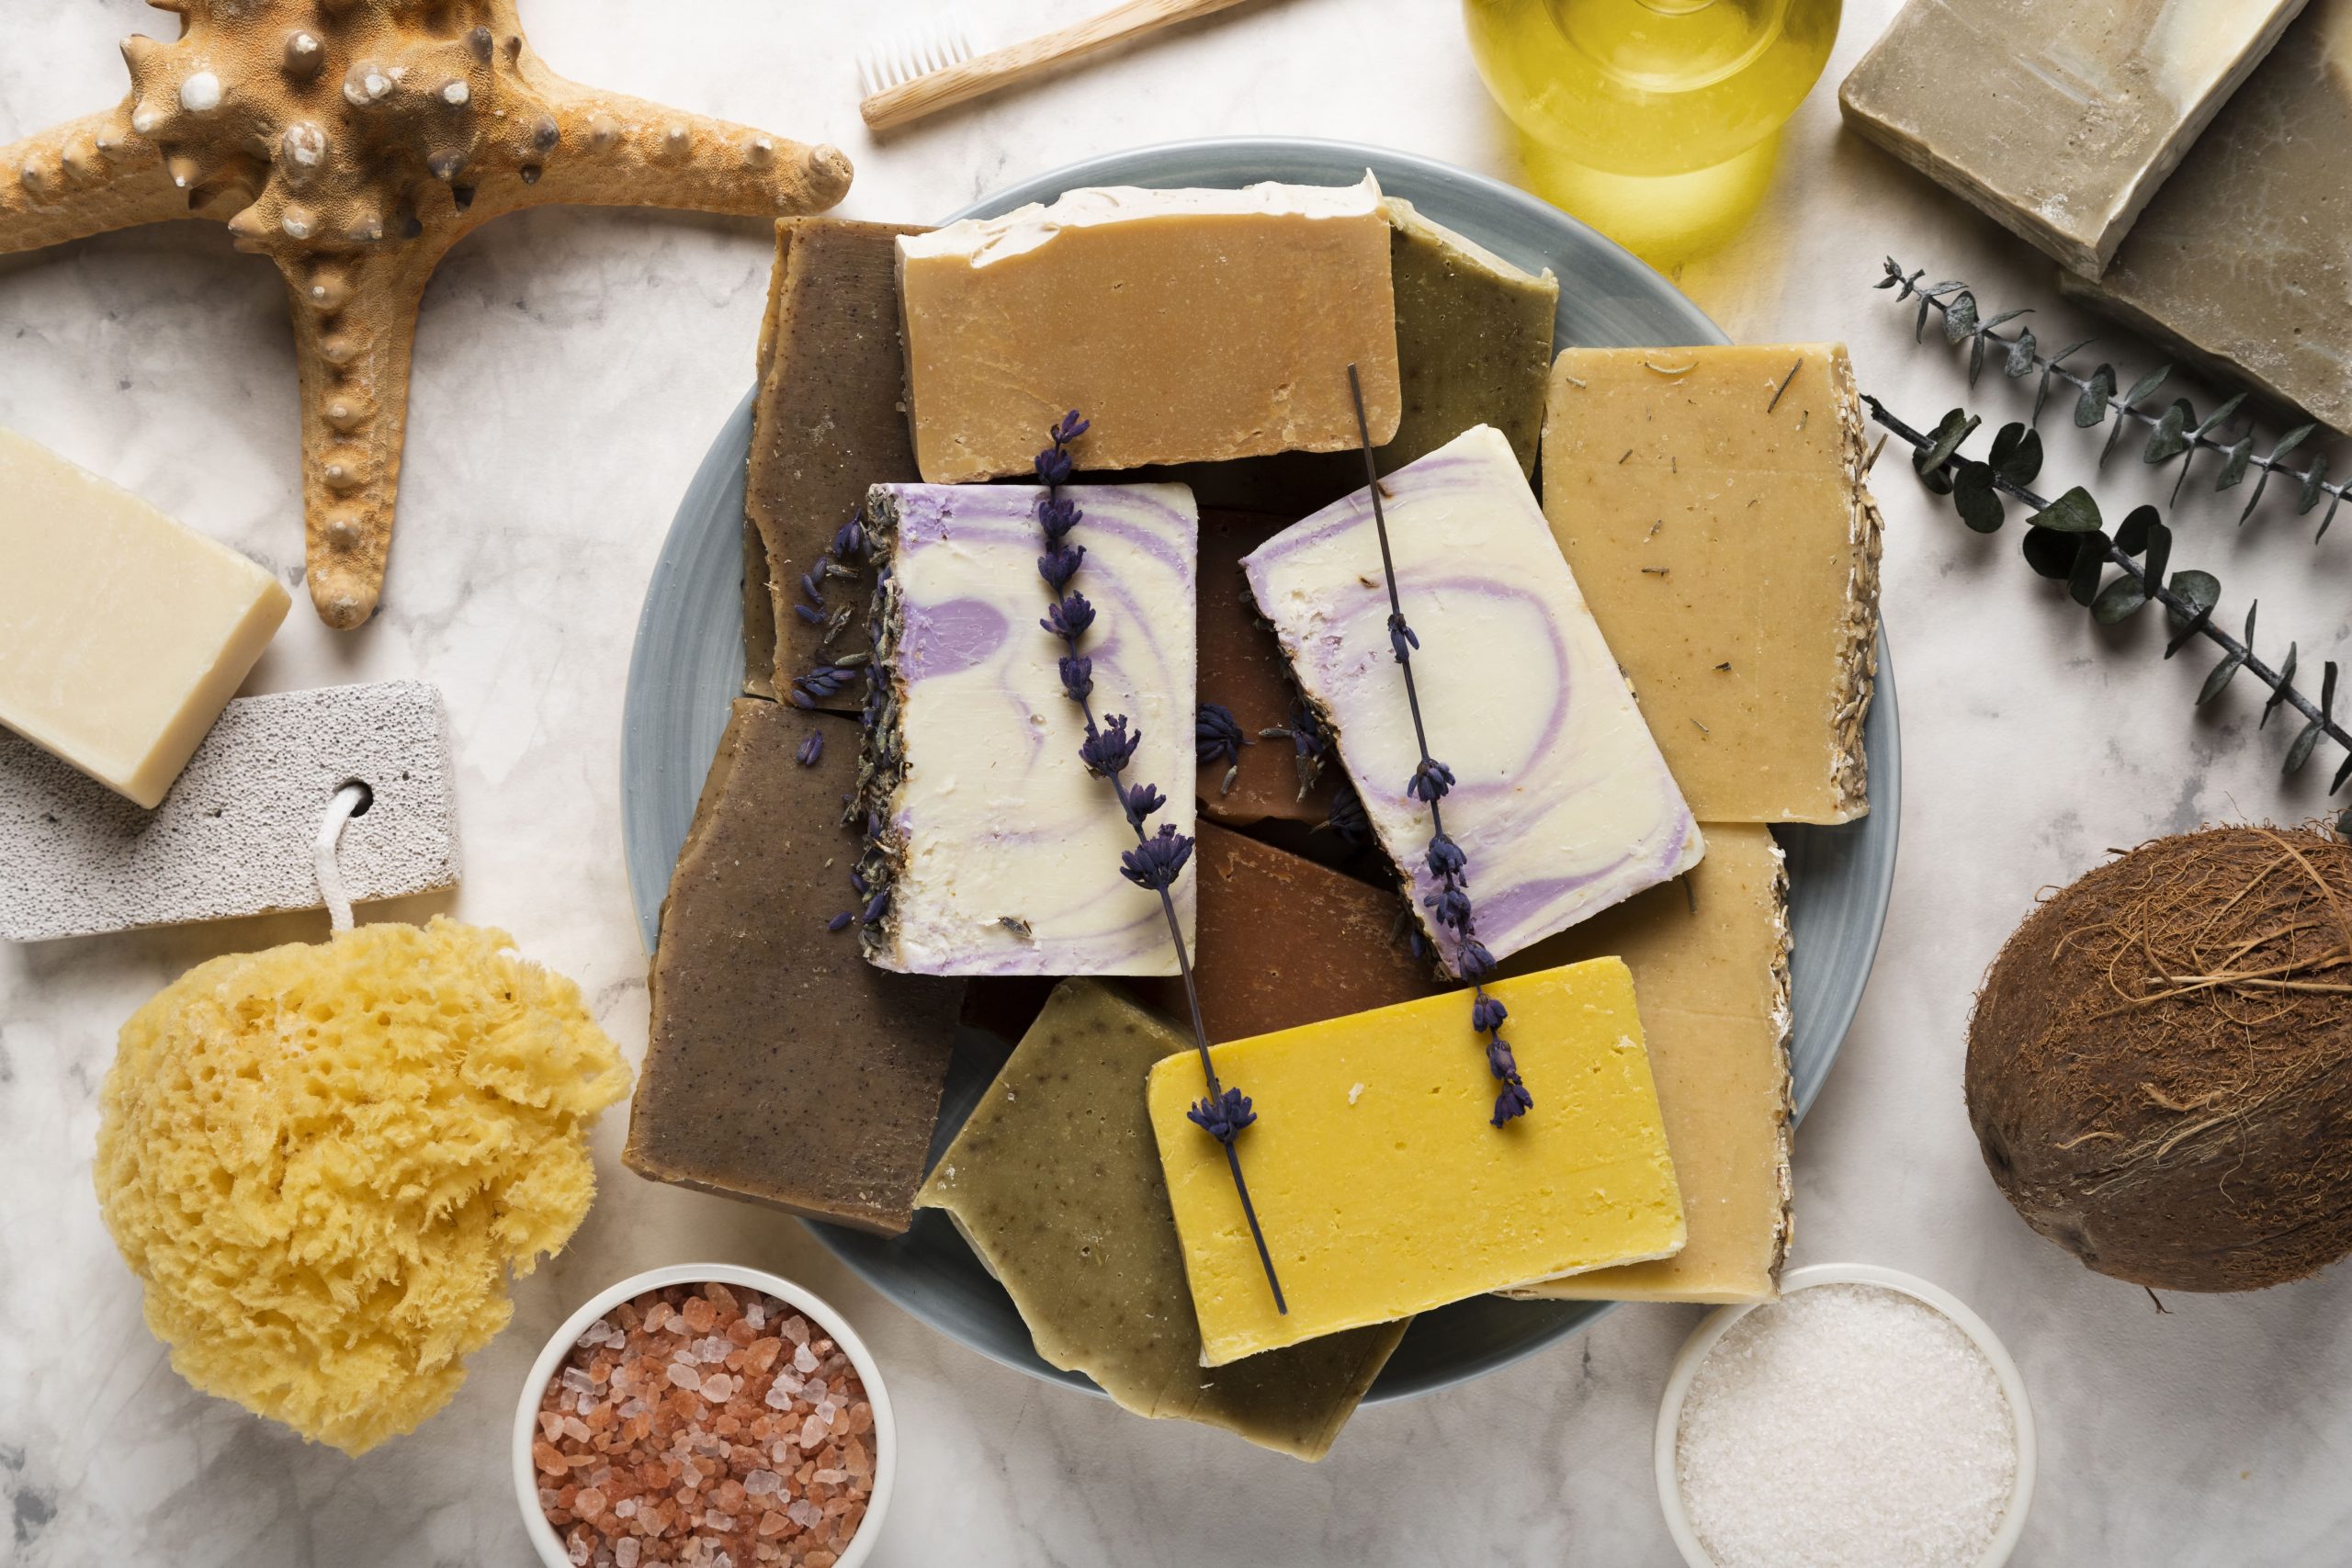 Specialty soap and skincare can be sold at high margins to customers.